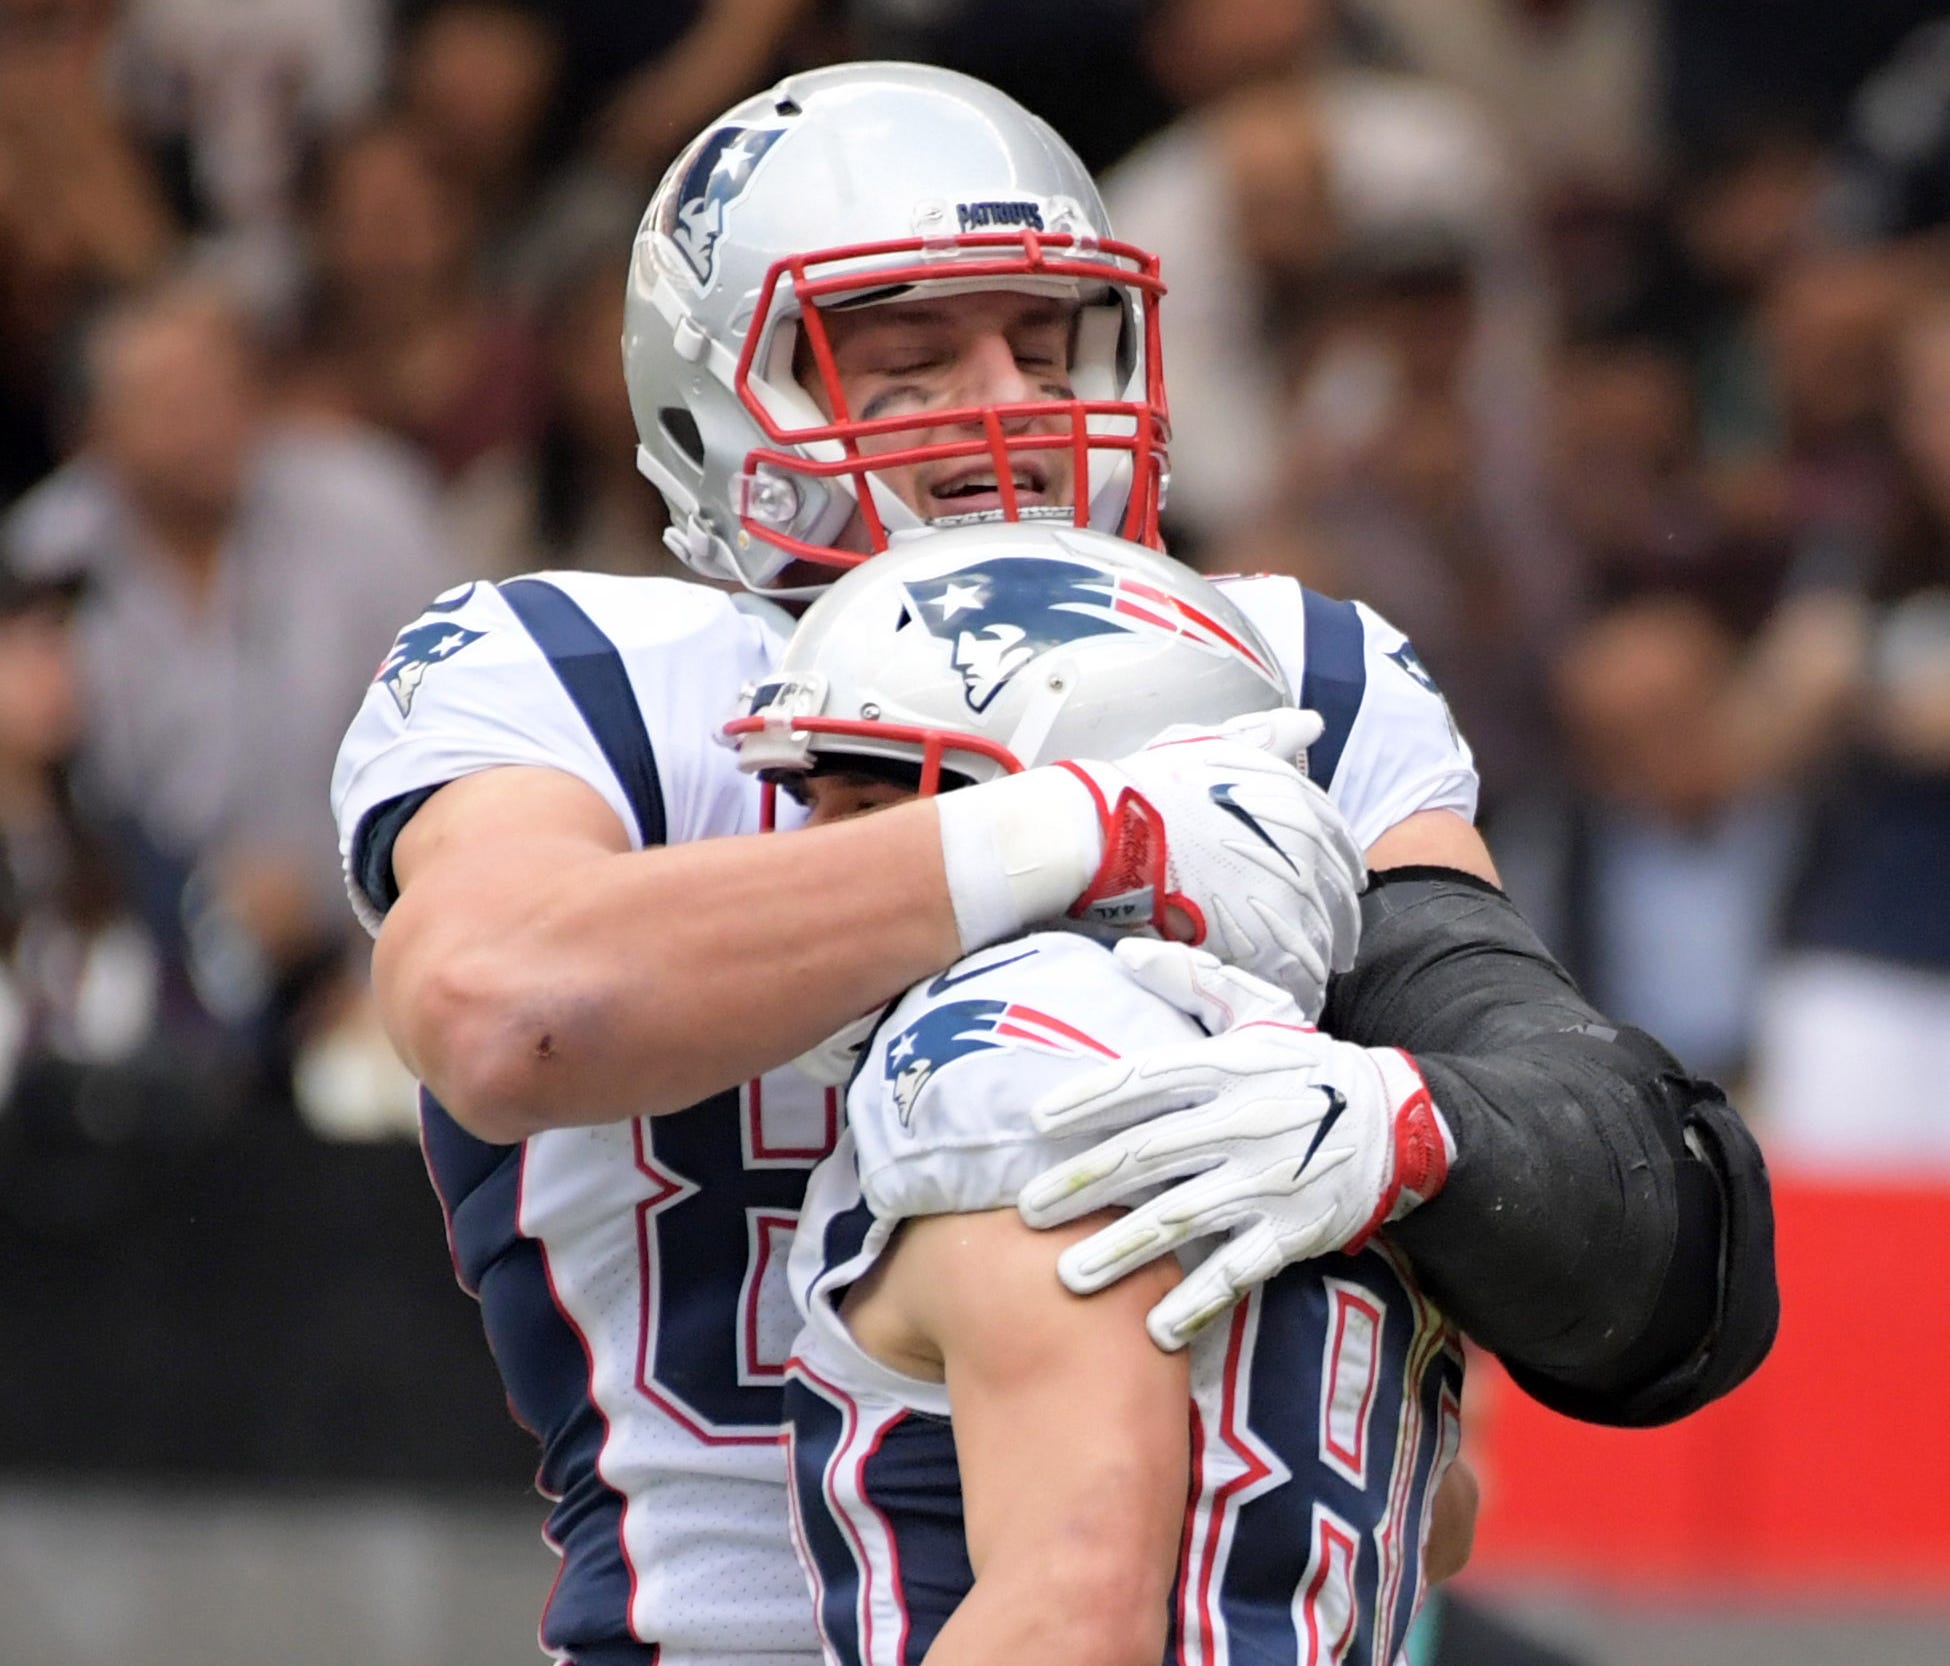 New England Patriots wide receiver Danny Amendola (80) celebrates with tight end Rob Gronkowski (87) after catching a touchdown pass in the second quarter against the Oakland Raiders during an NFL International Series game at Estadio Azteca.